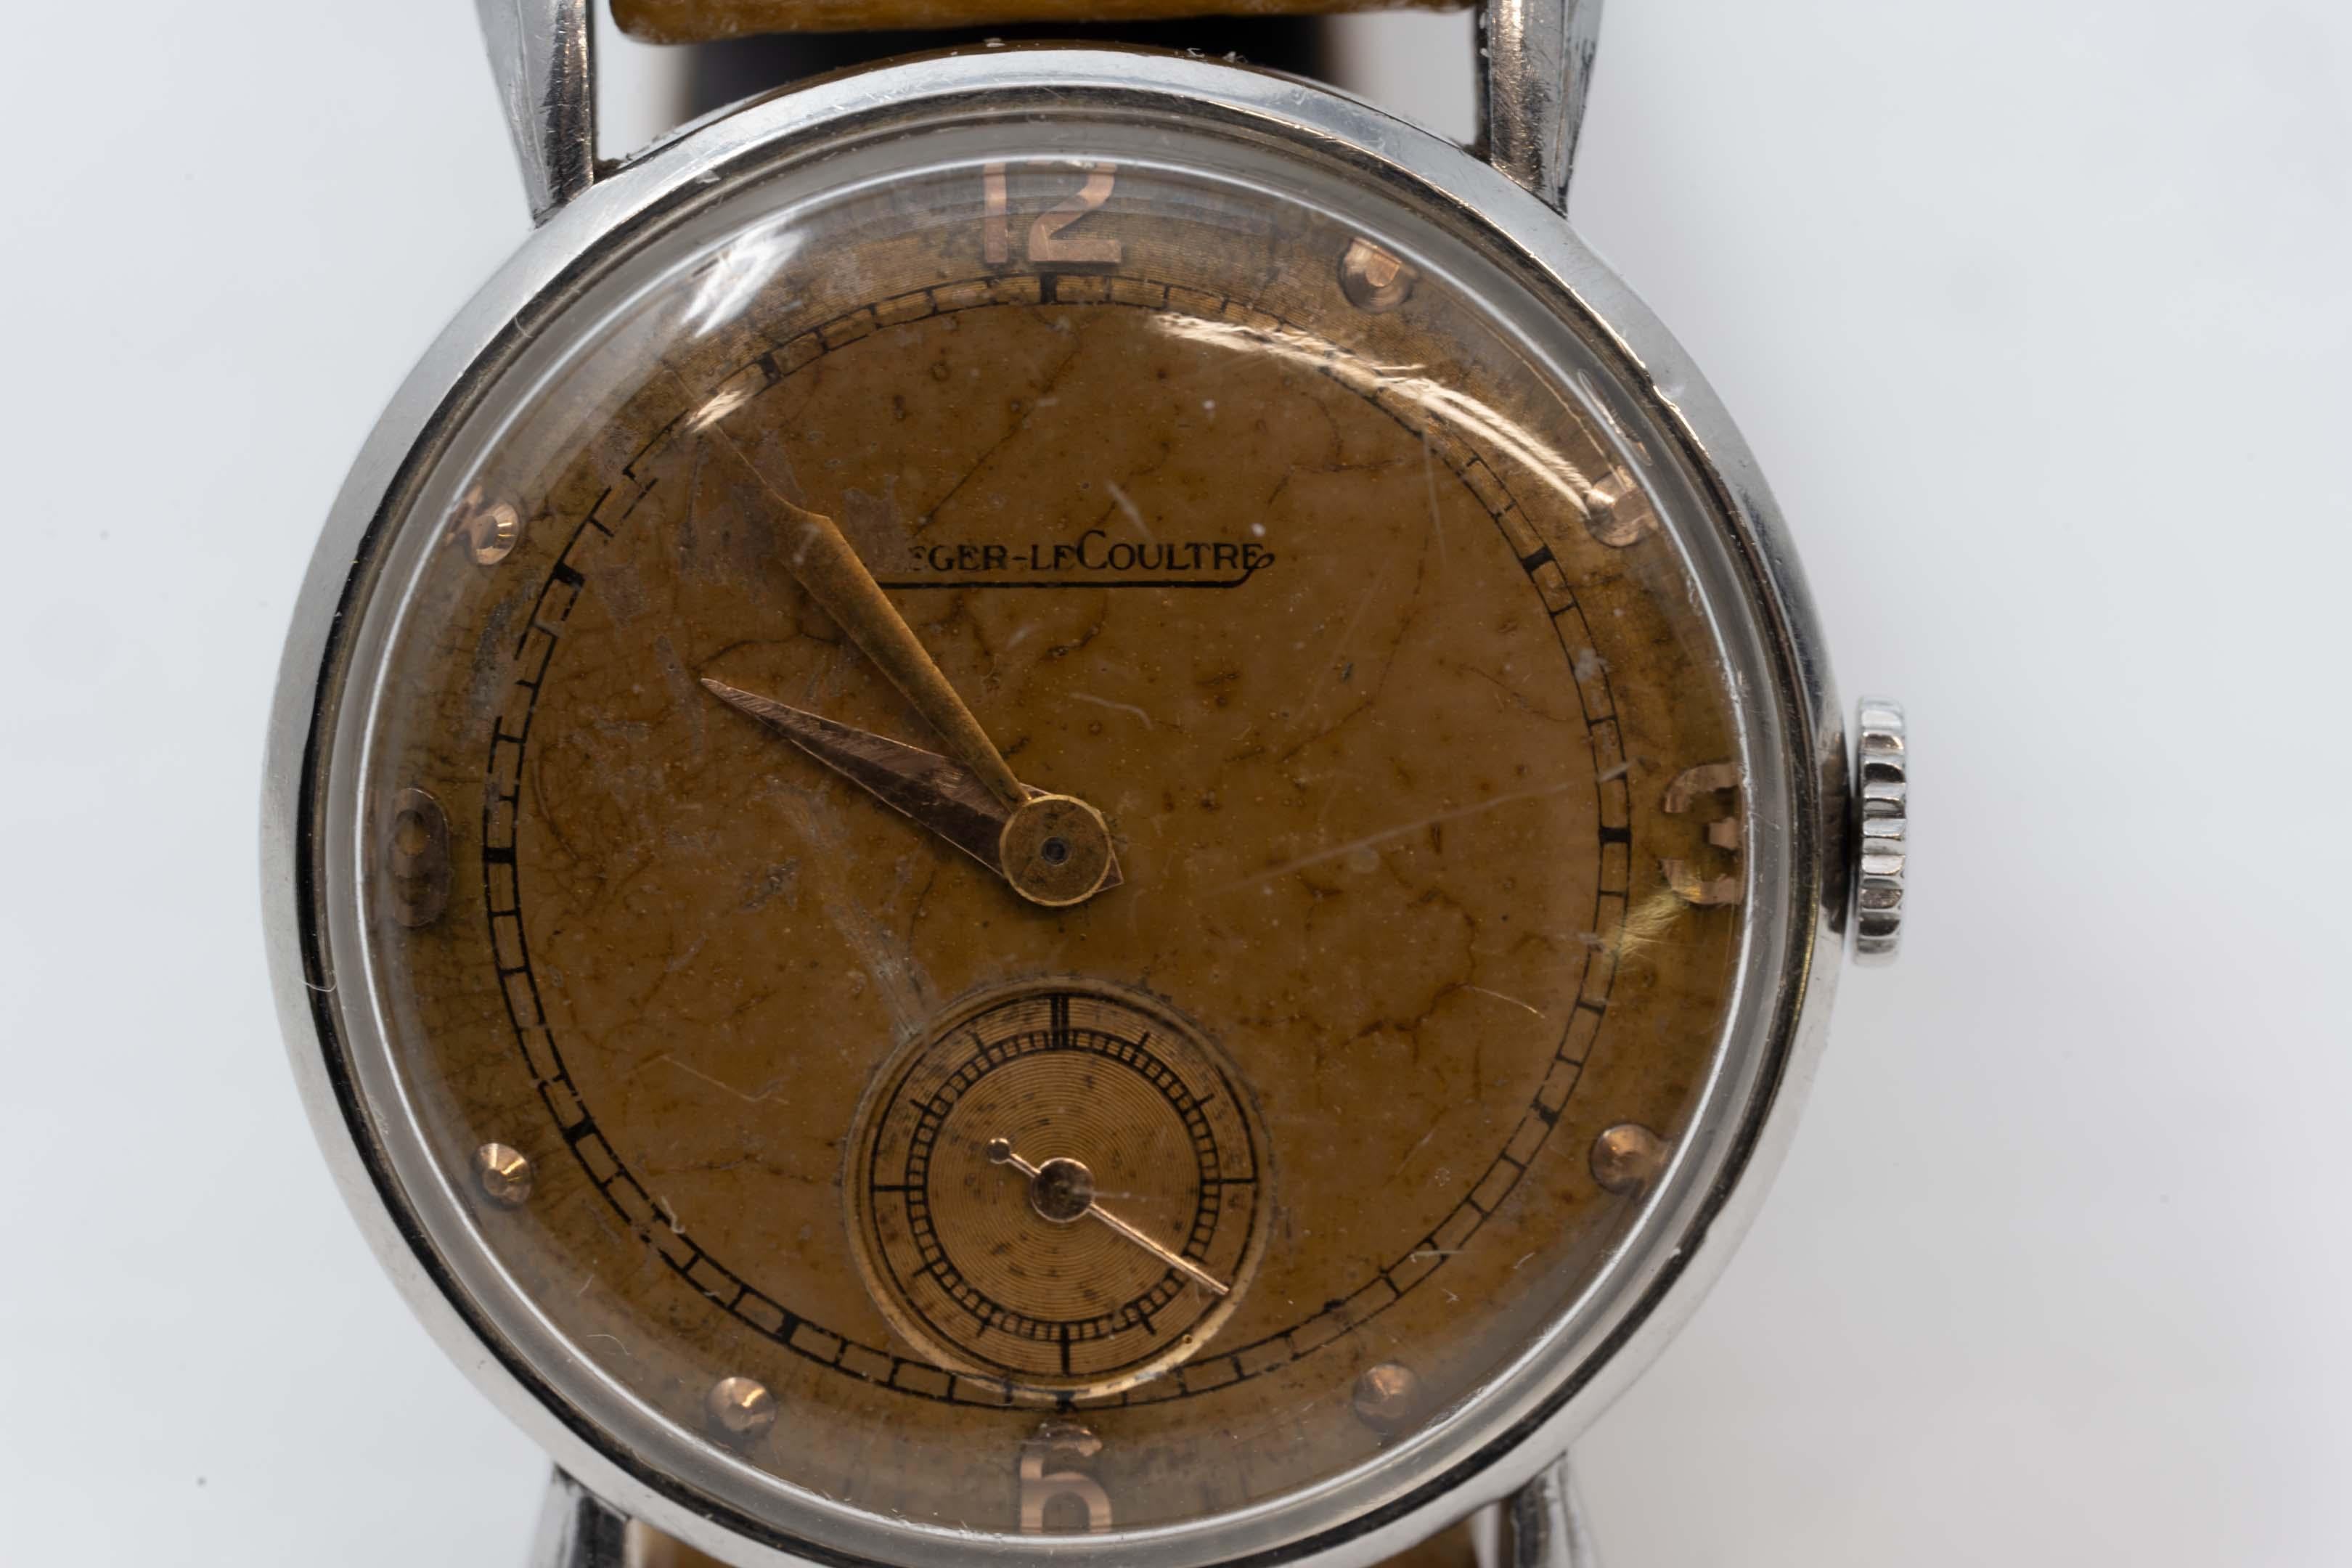 Jaeger LeCoultre stainless steel wristwatch circa 1950 medium size case 30mm. Acrylic crystal manual wind movement. Original two-tone antique salmon colour dial, wear visible. Leather bracelet, 17 jewels. In good working order, accuracy is not